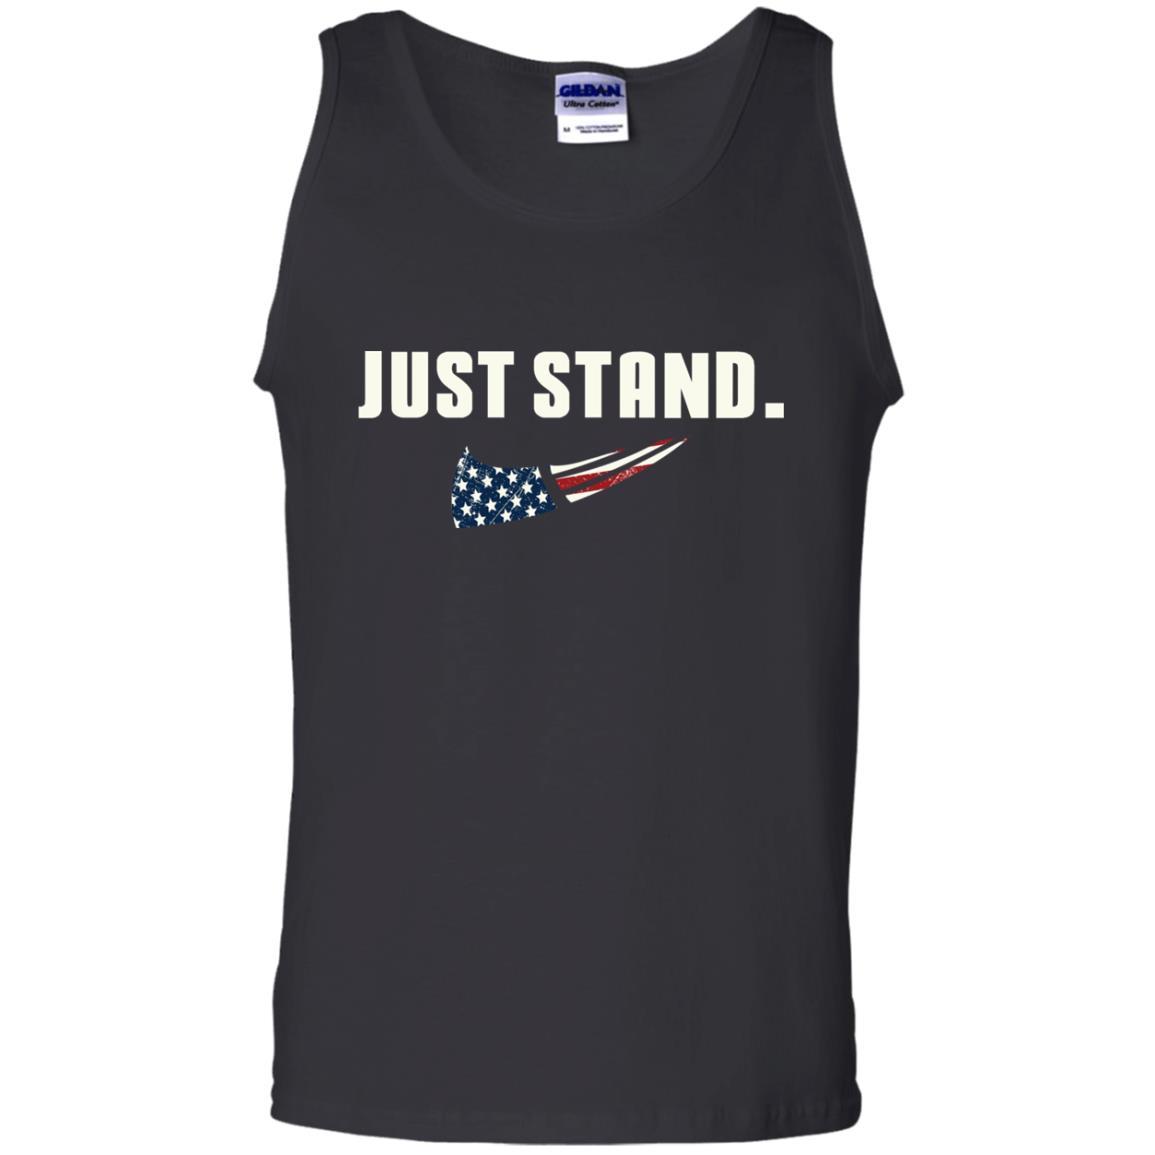 Military T-Shirt "Just Stand For The Flag Men On" Front-TShirt-General-Veterans Nation